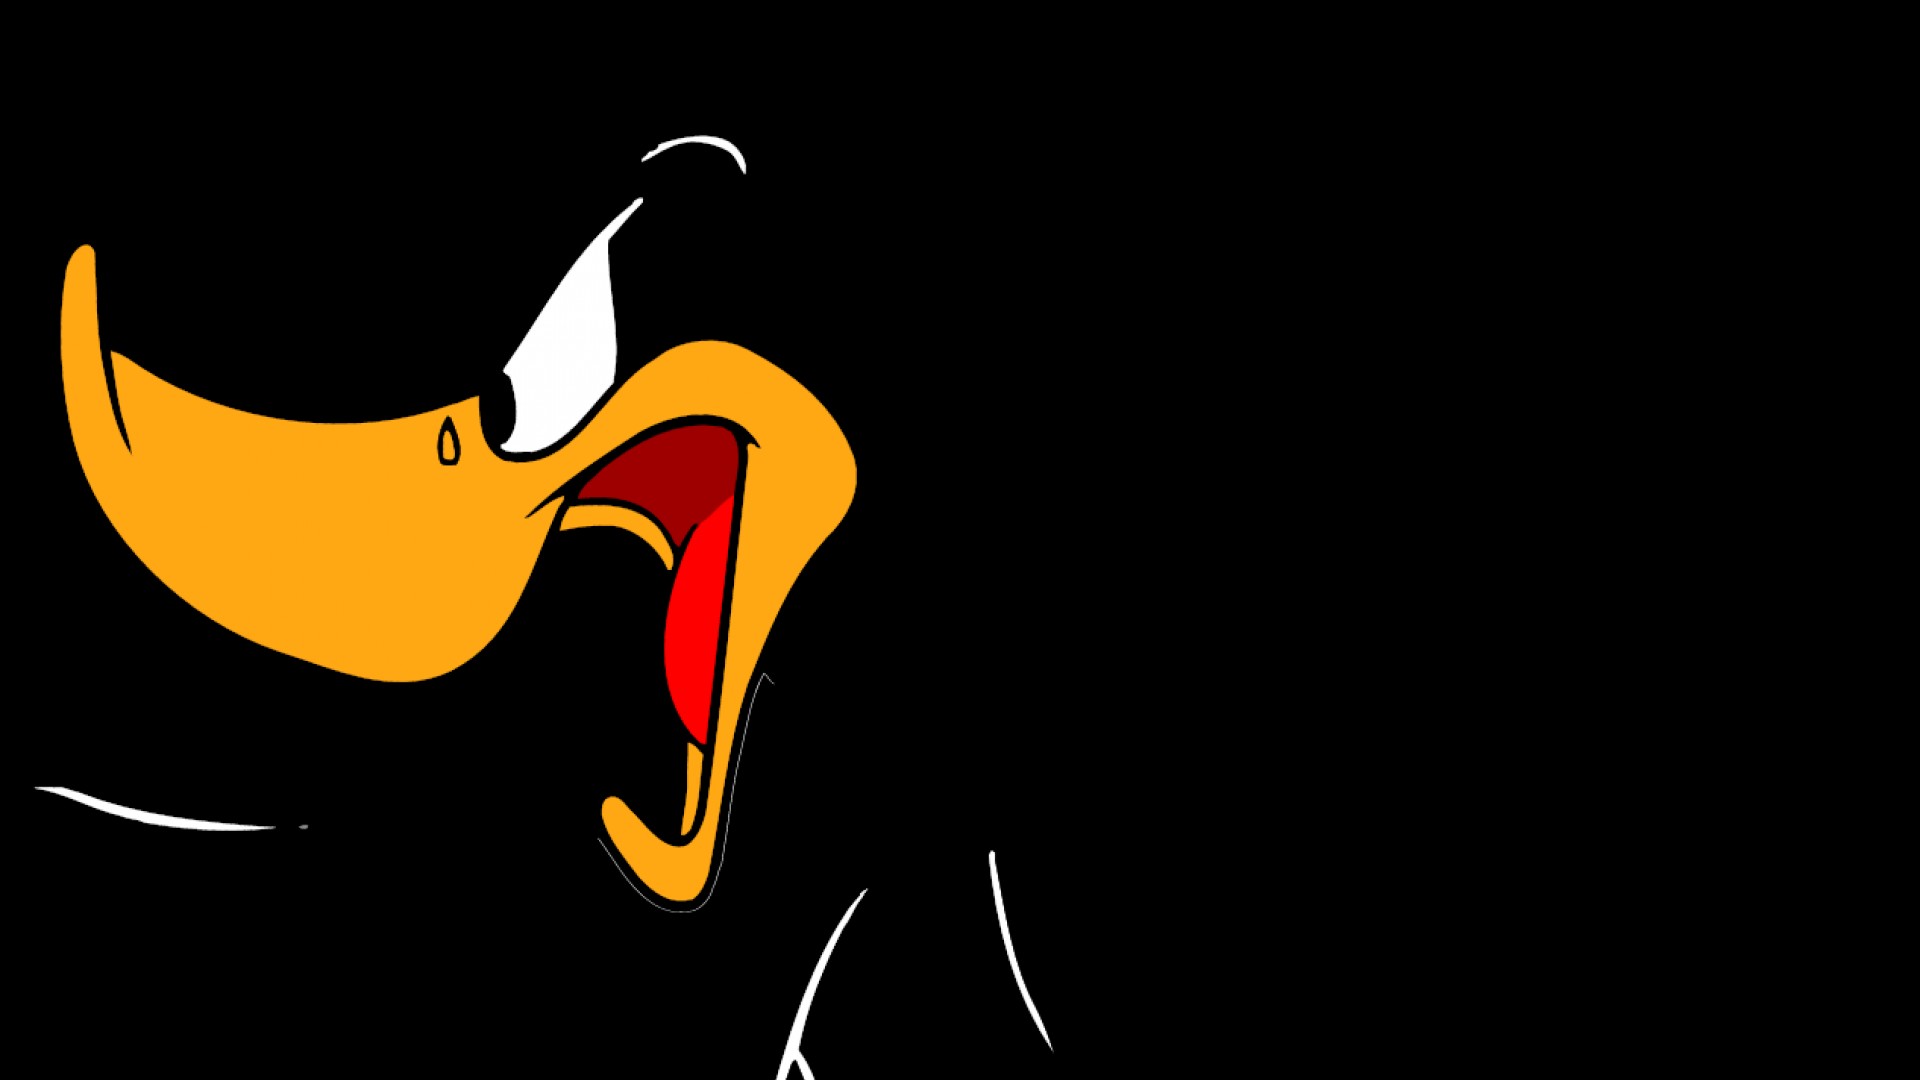 Daffy Duck Background Wallpaper High Definition Quality